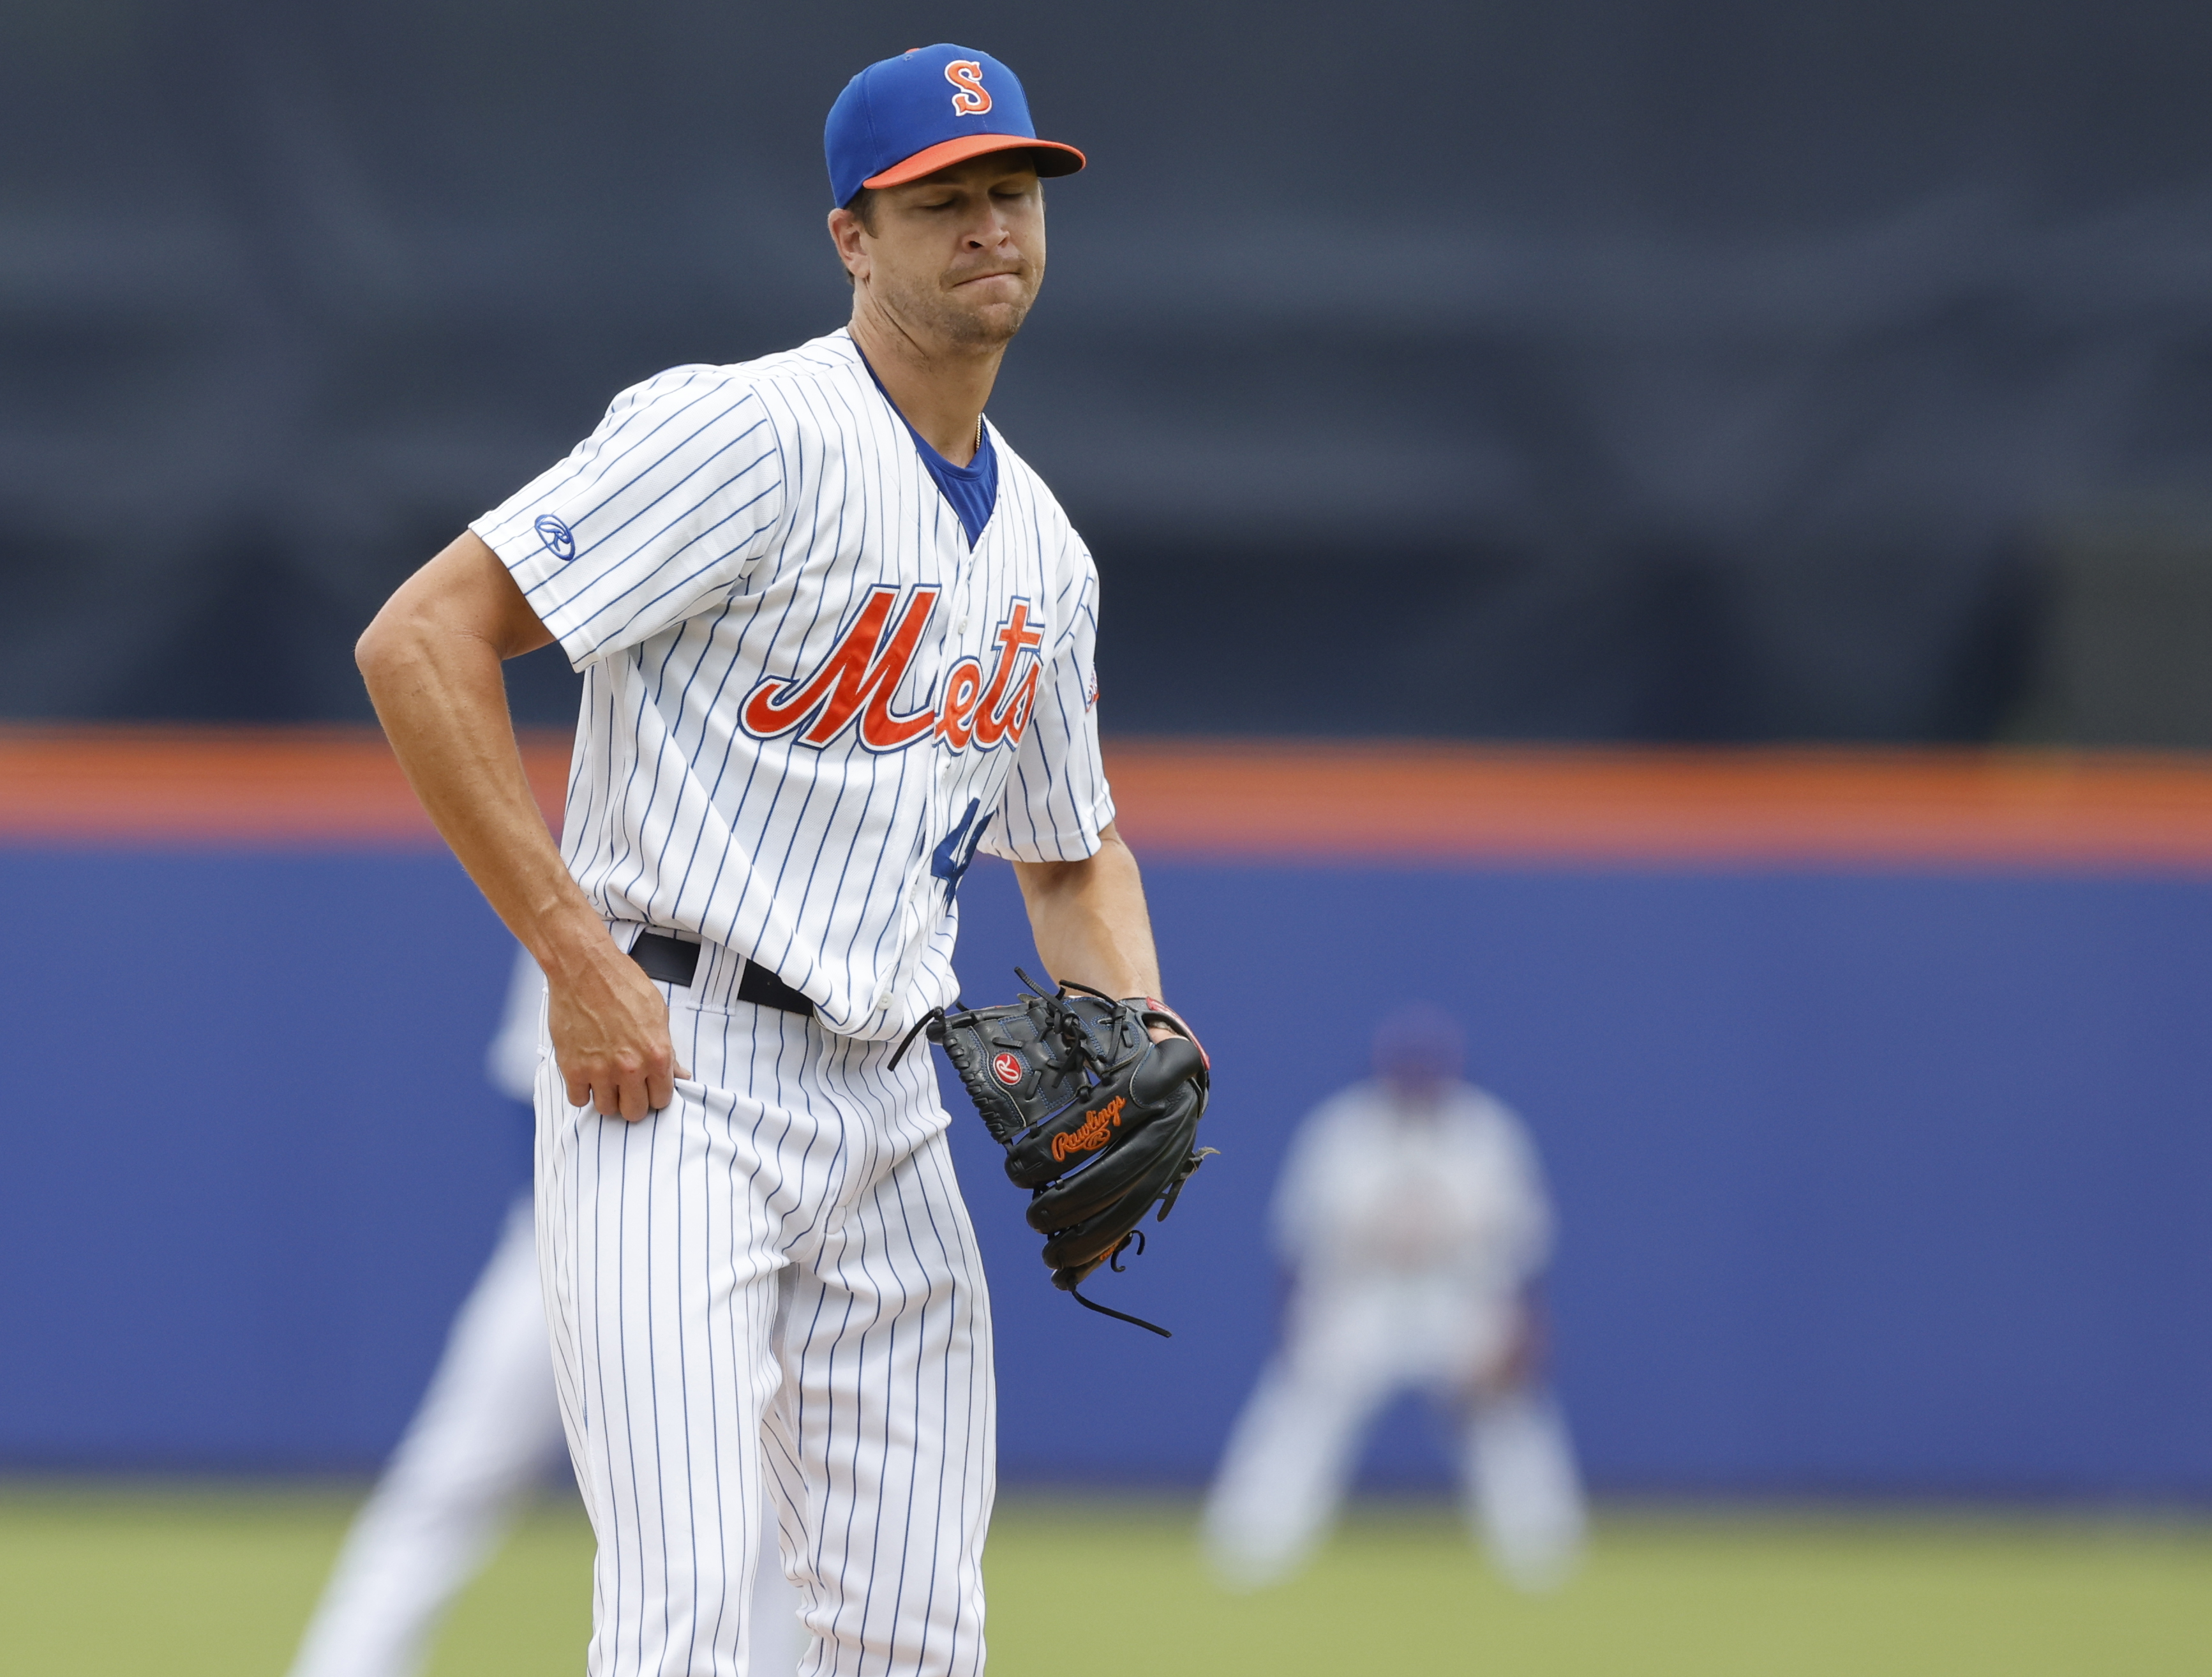 Should Jacob deGrom become a $37 million closer for the Texas Rangers?